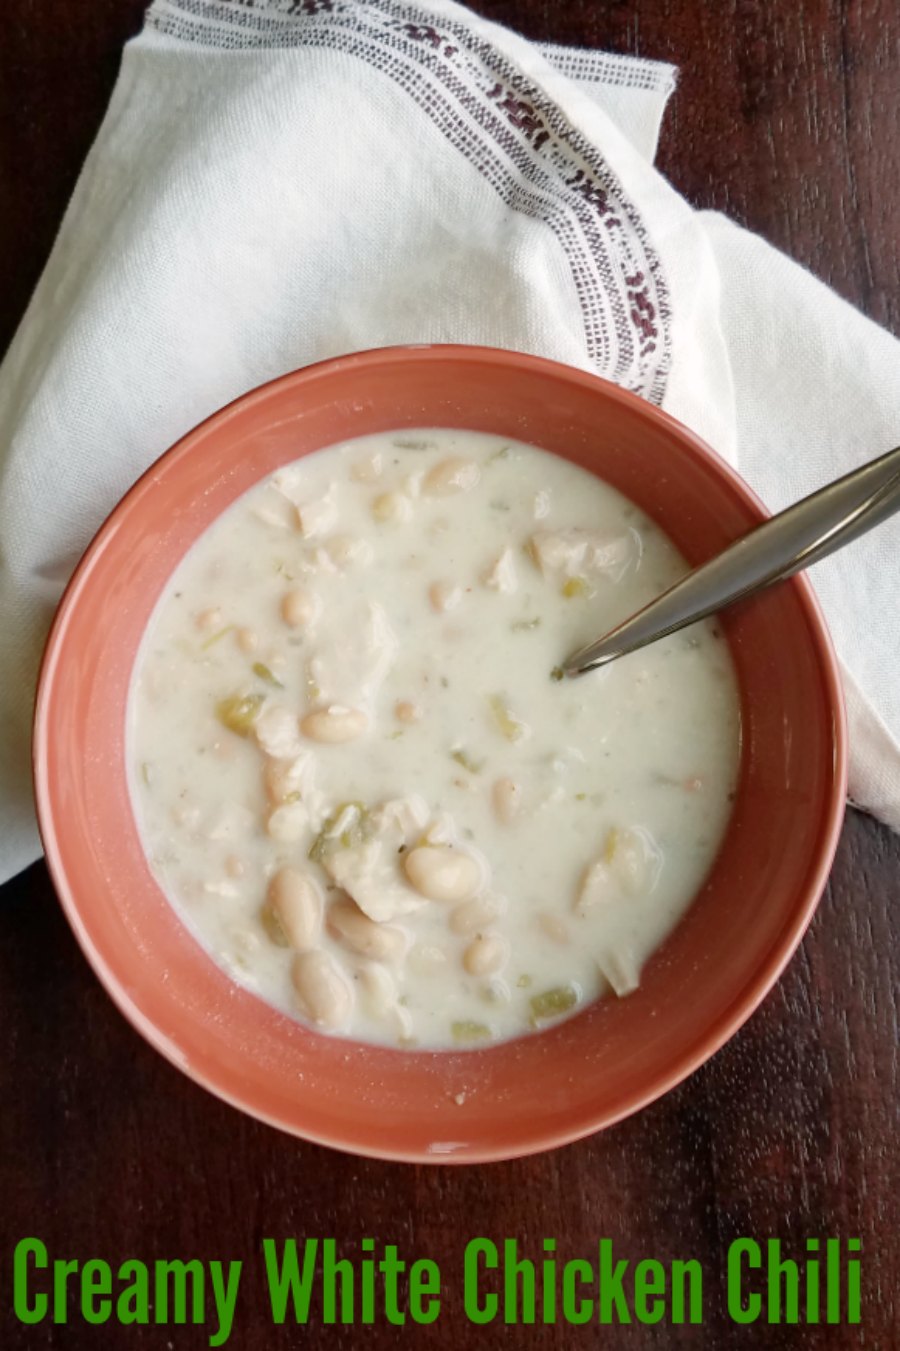 Creamy white chicken chili is a perfect cold weather meal. Make it for game day or any day to warm up from the inside out.